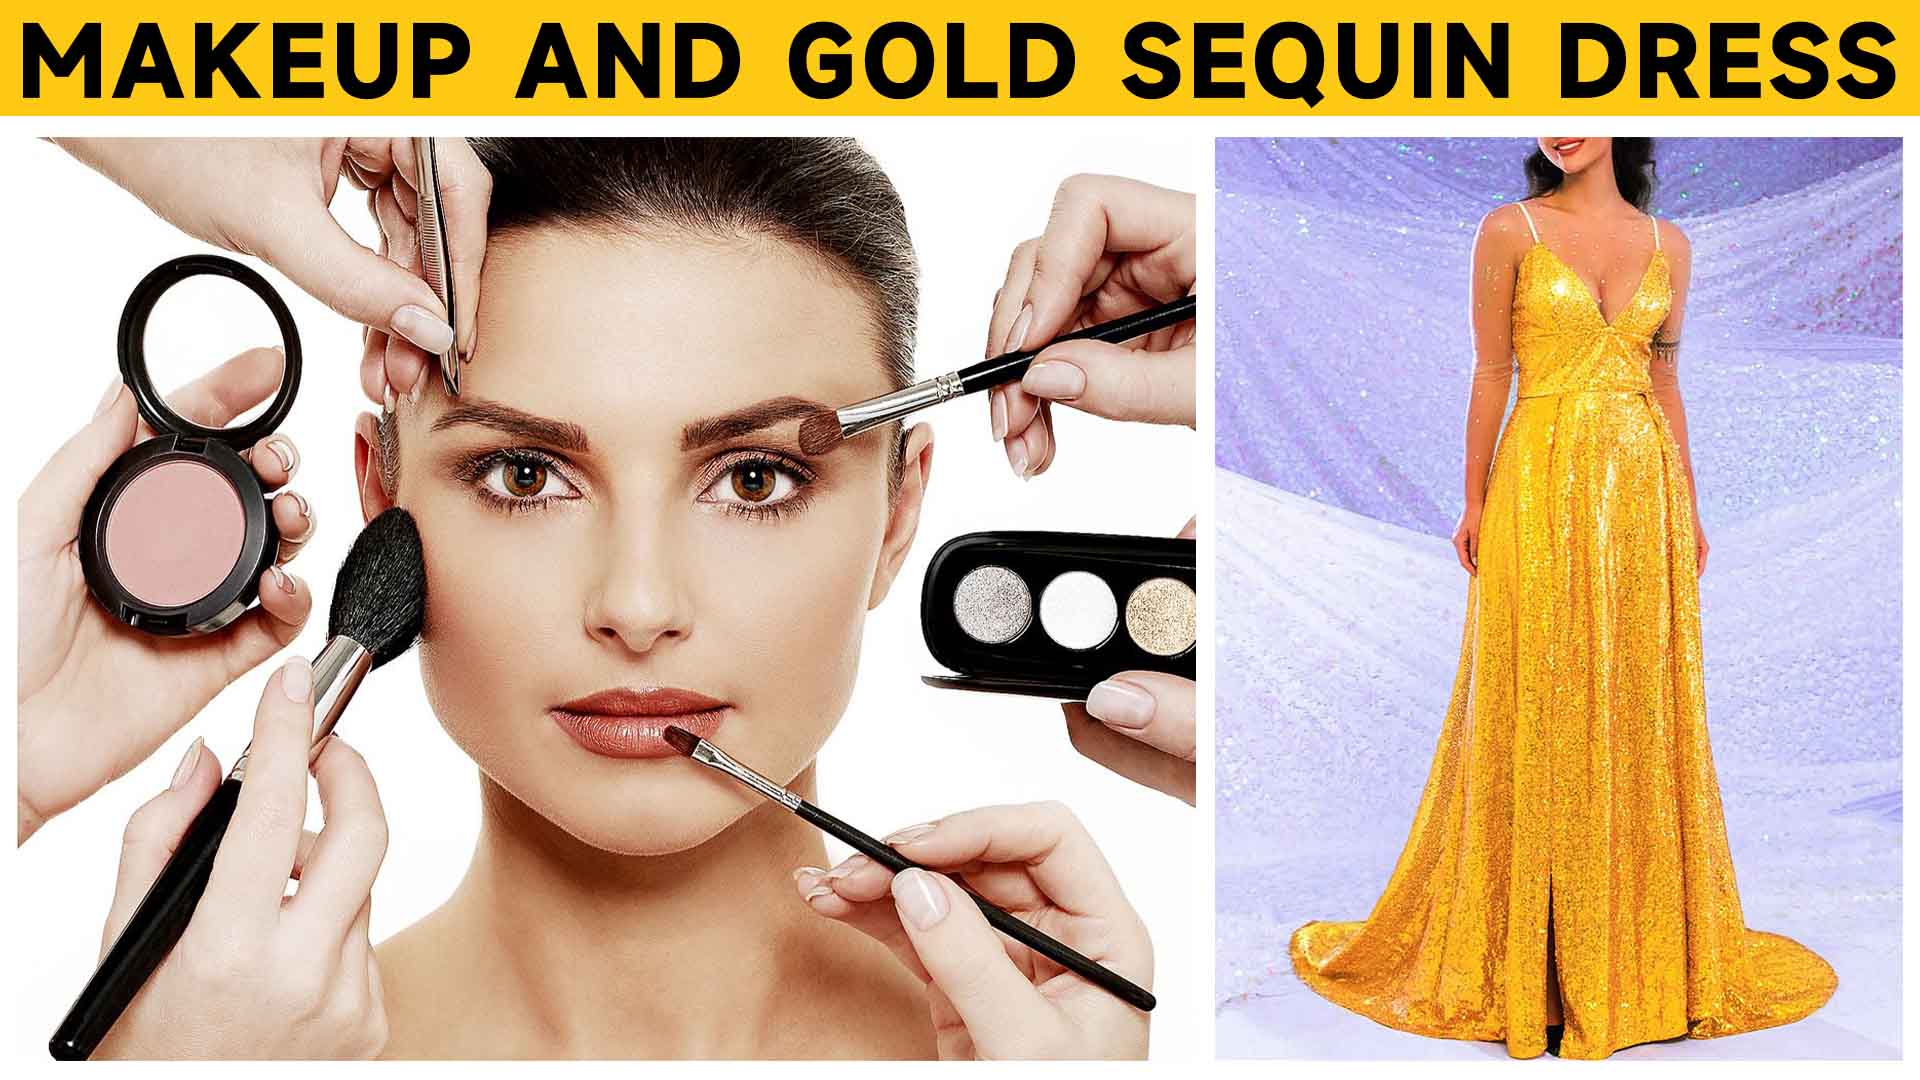 Age-Level Sparkles: A Guide to Pairing Gold Sequin Dresses with Makeup